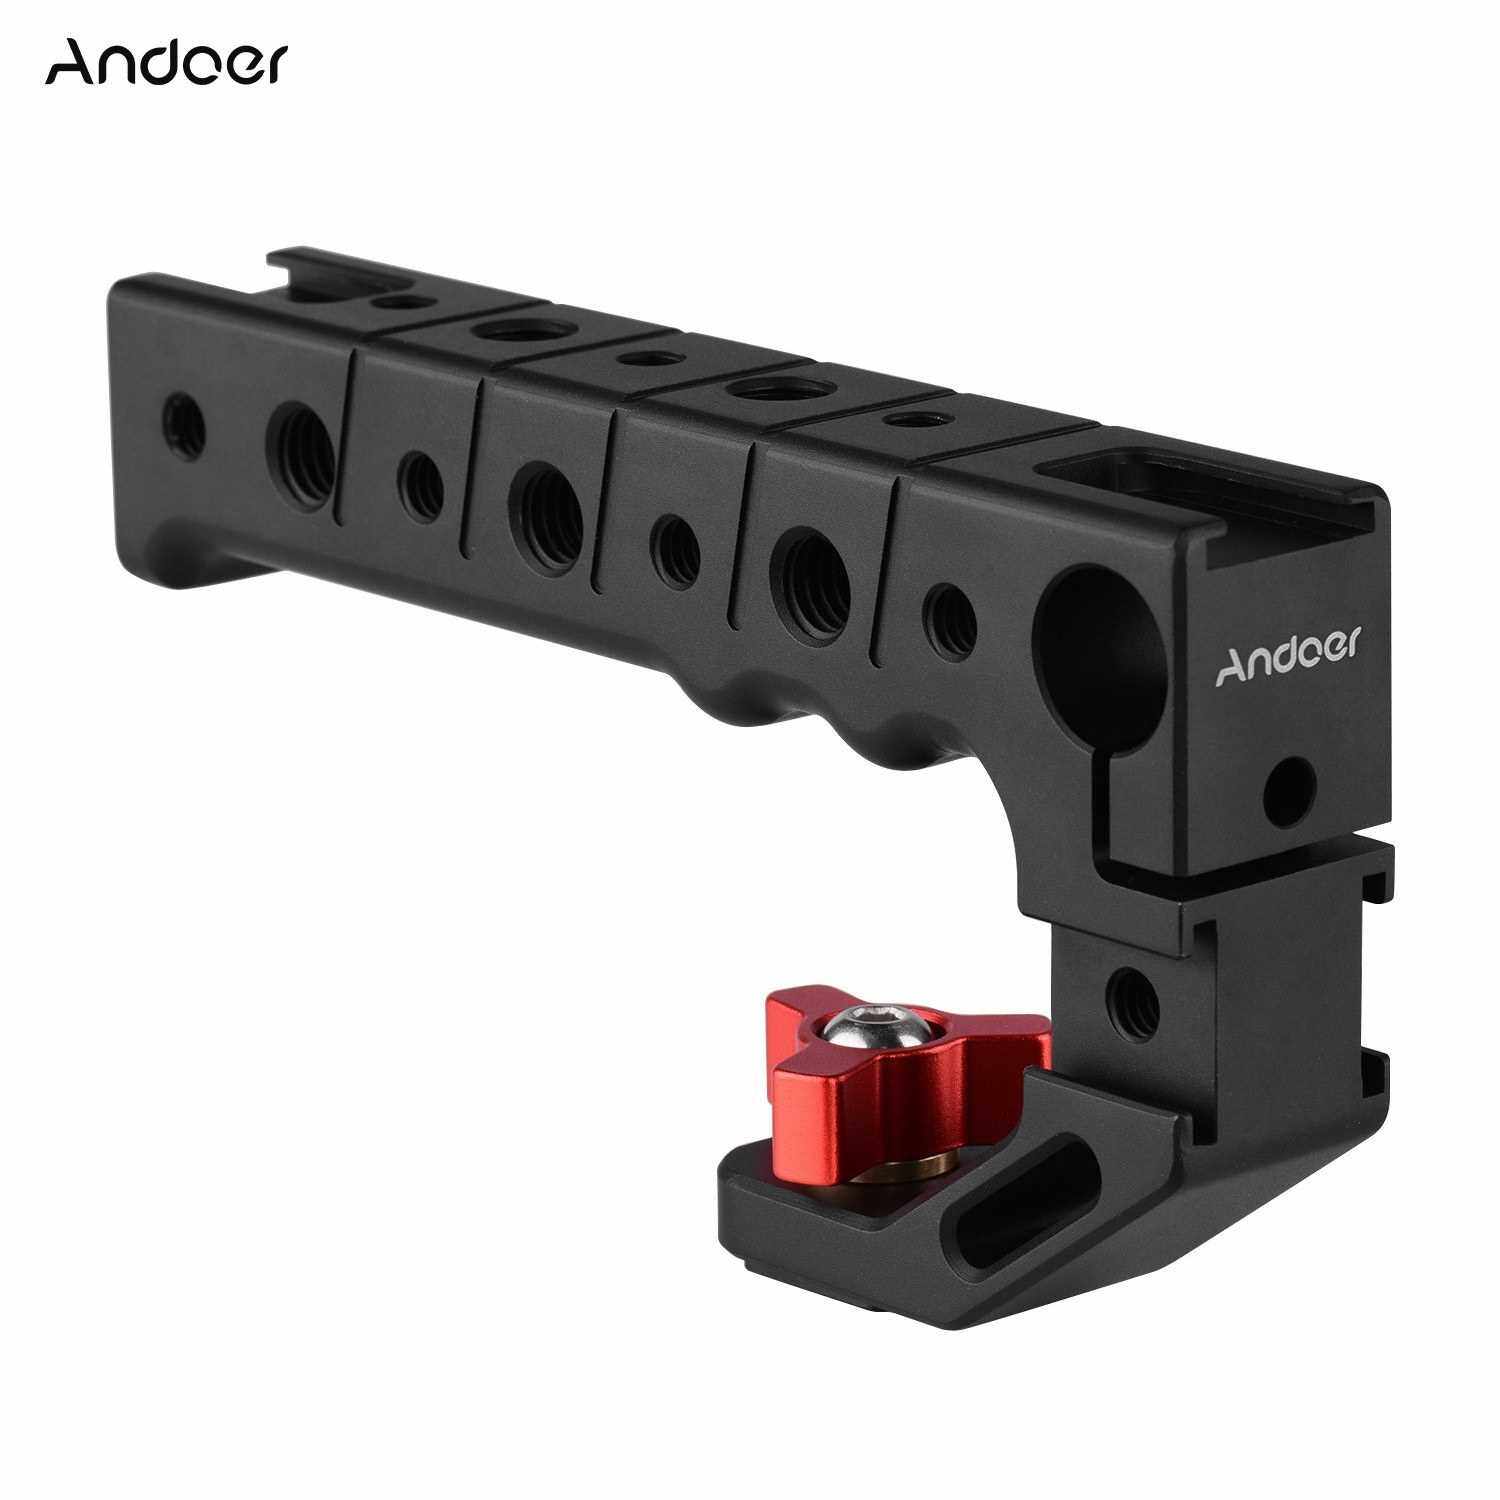 Andoer Aluminum Alloy Camera Handle Grip with Cold Shoe Mount 1/4 3/8 Threaded Holes 15mm Rod Clamp for Microphone LED Light Mounting Replacement for Camera and Rig (Standard)